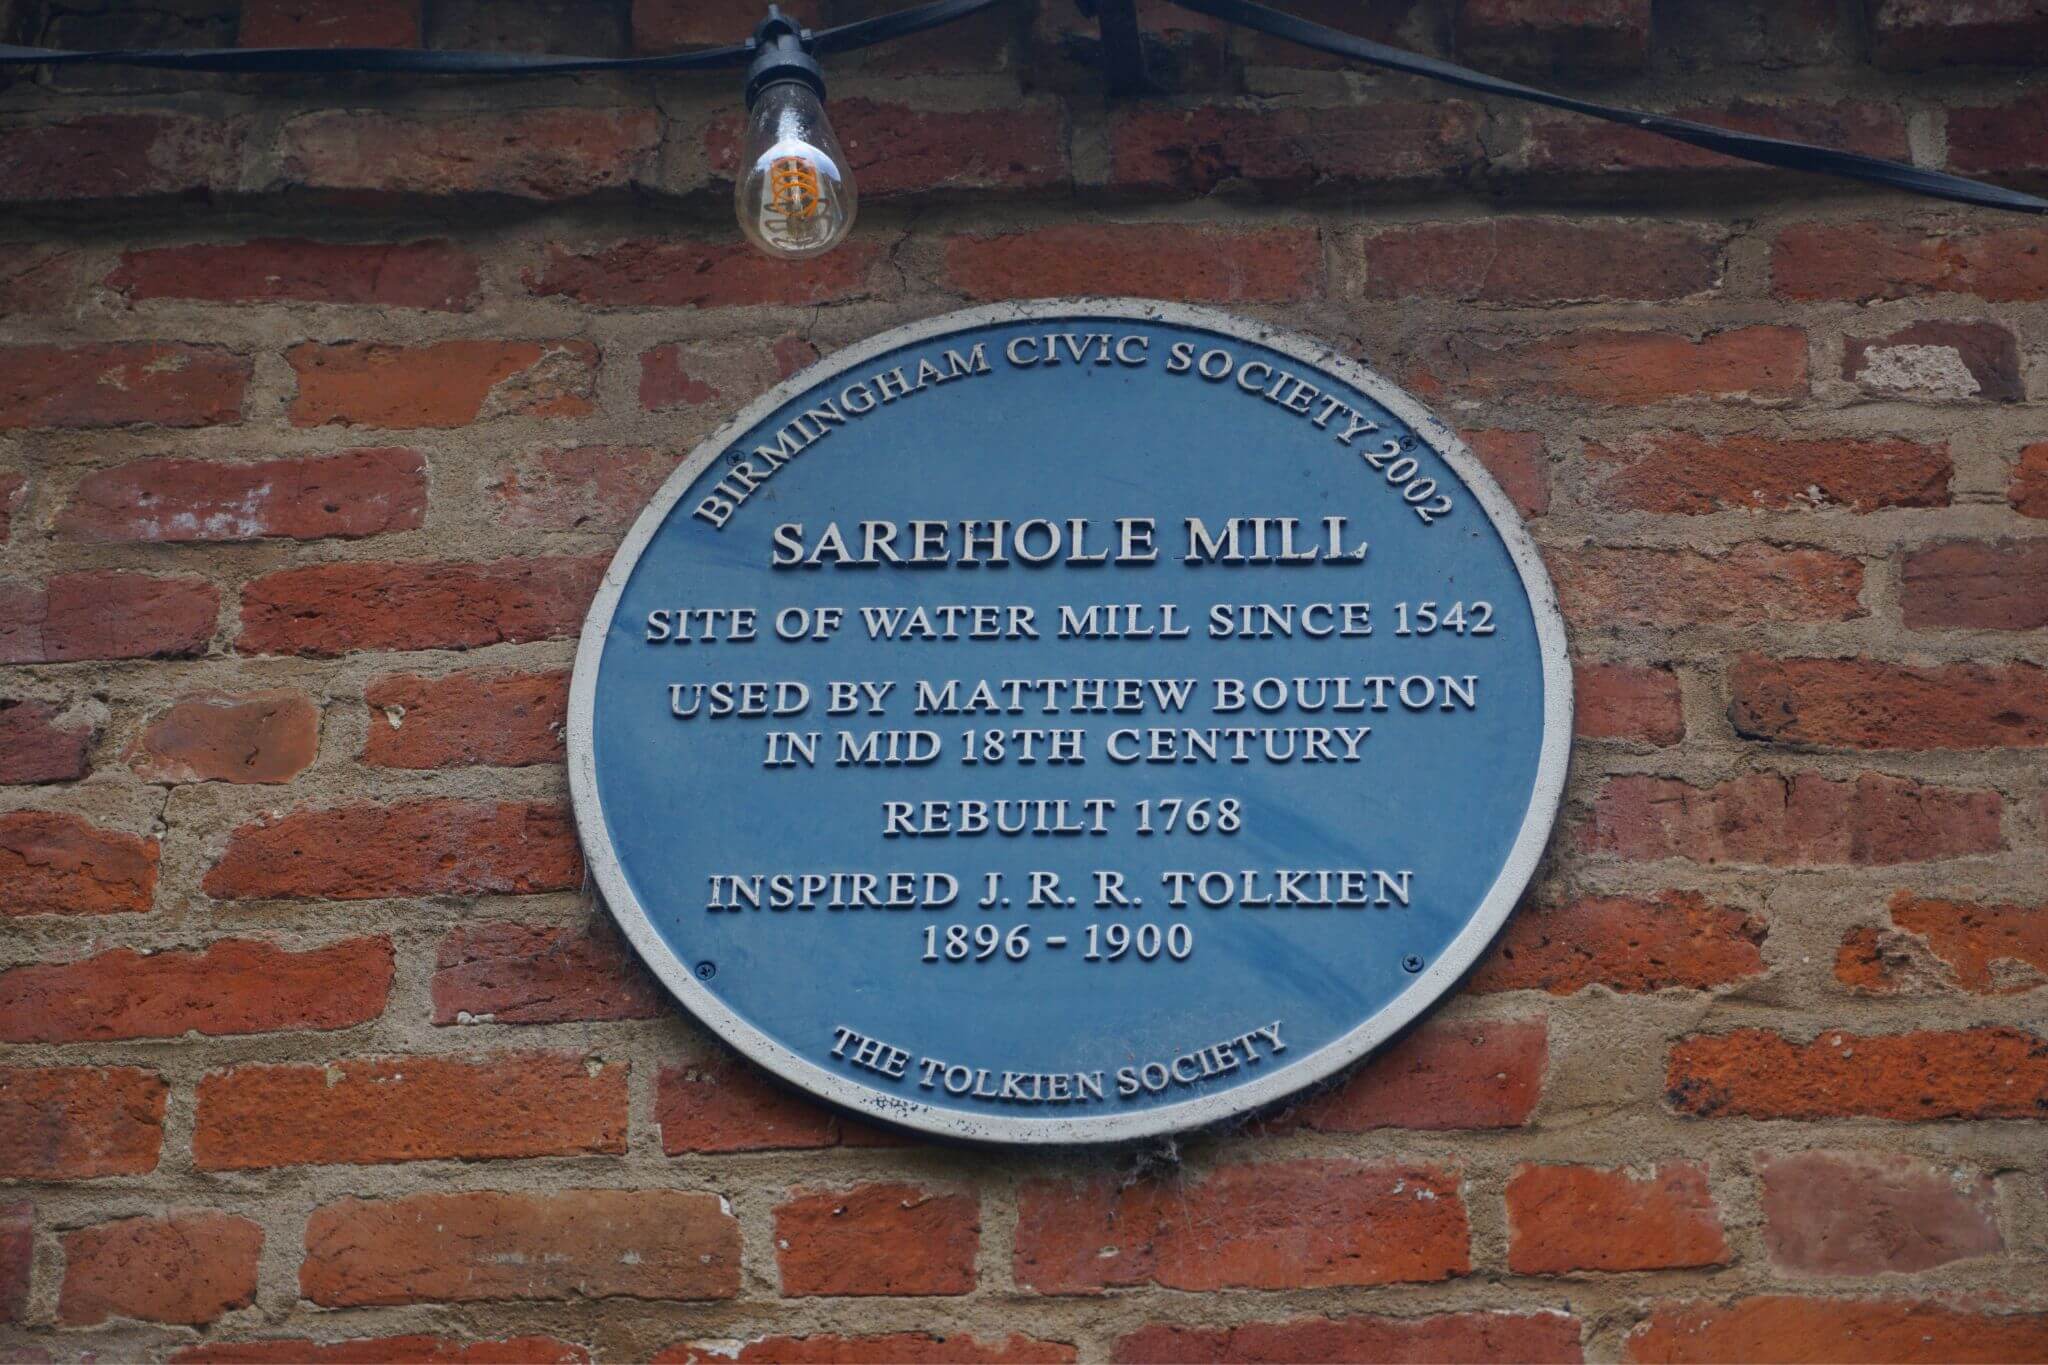 A Blue Plaque dedicated to J.R.R Tolkien